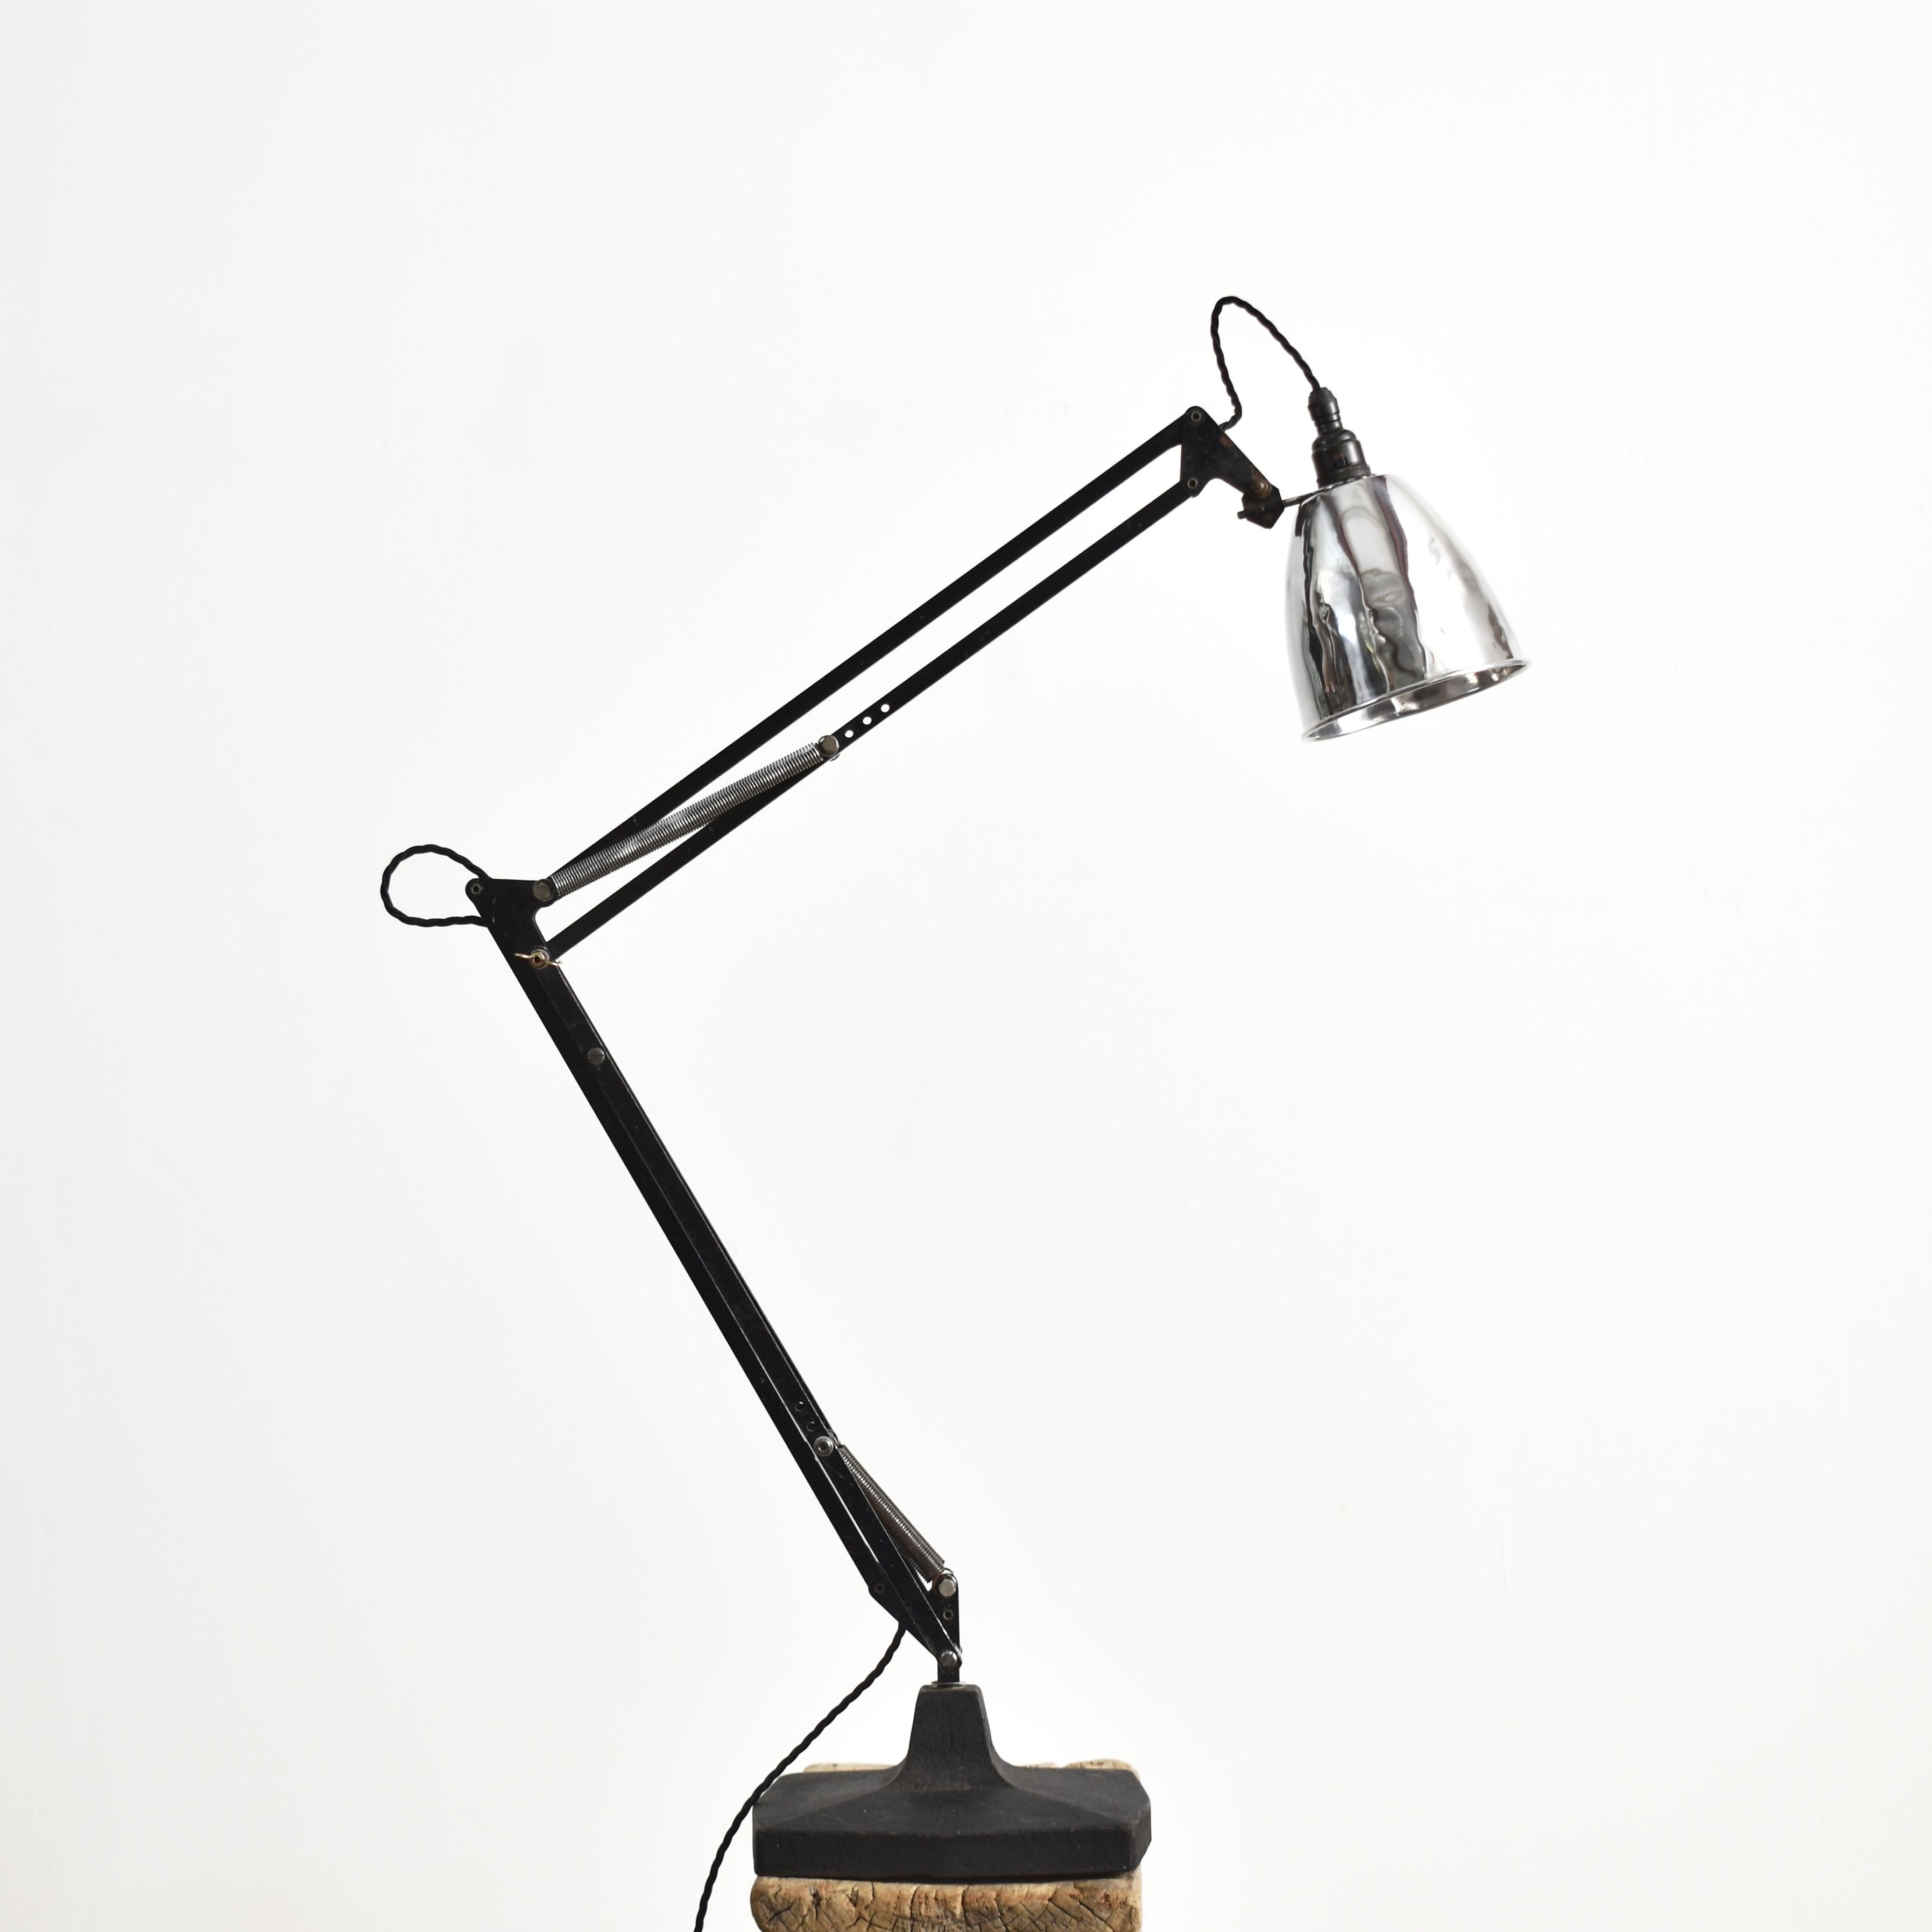 Original Anglepoise Desk Lamp 1209 Model By Herbert Terry & Sons – A

An original Anglepoise lamp By Herbert Terry and Sons, Model 1209, A design classic desk lamp with a cast metal bowed edge square base, this is the rarer larger base. The lamp